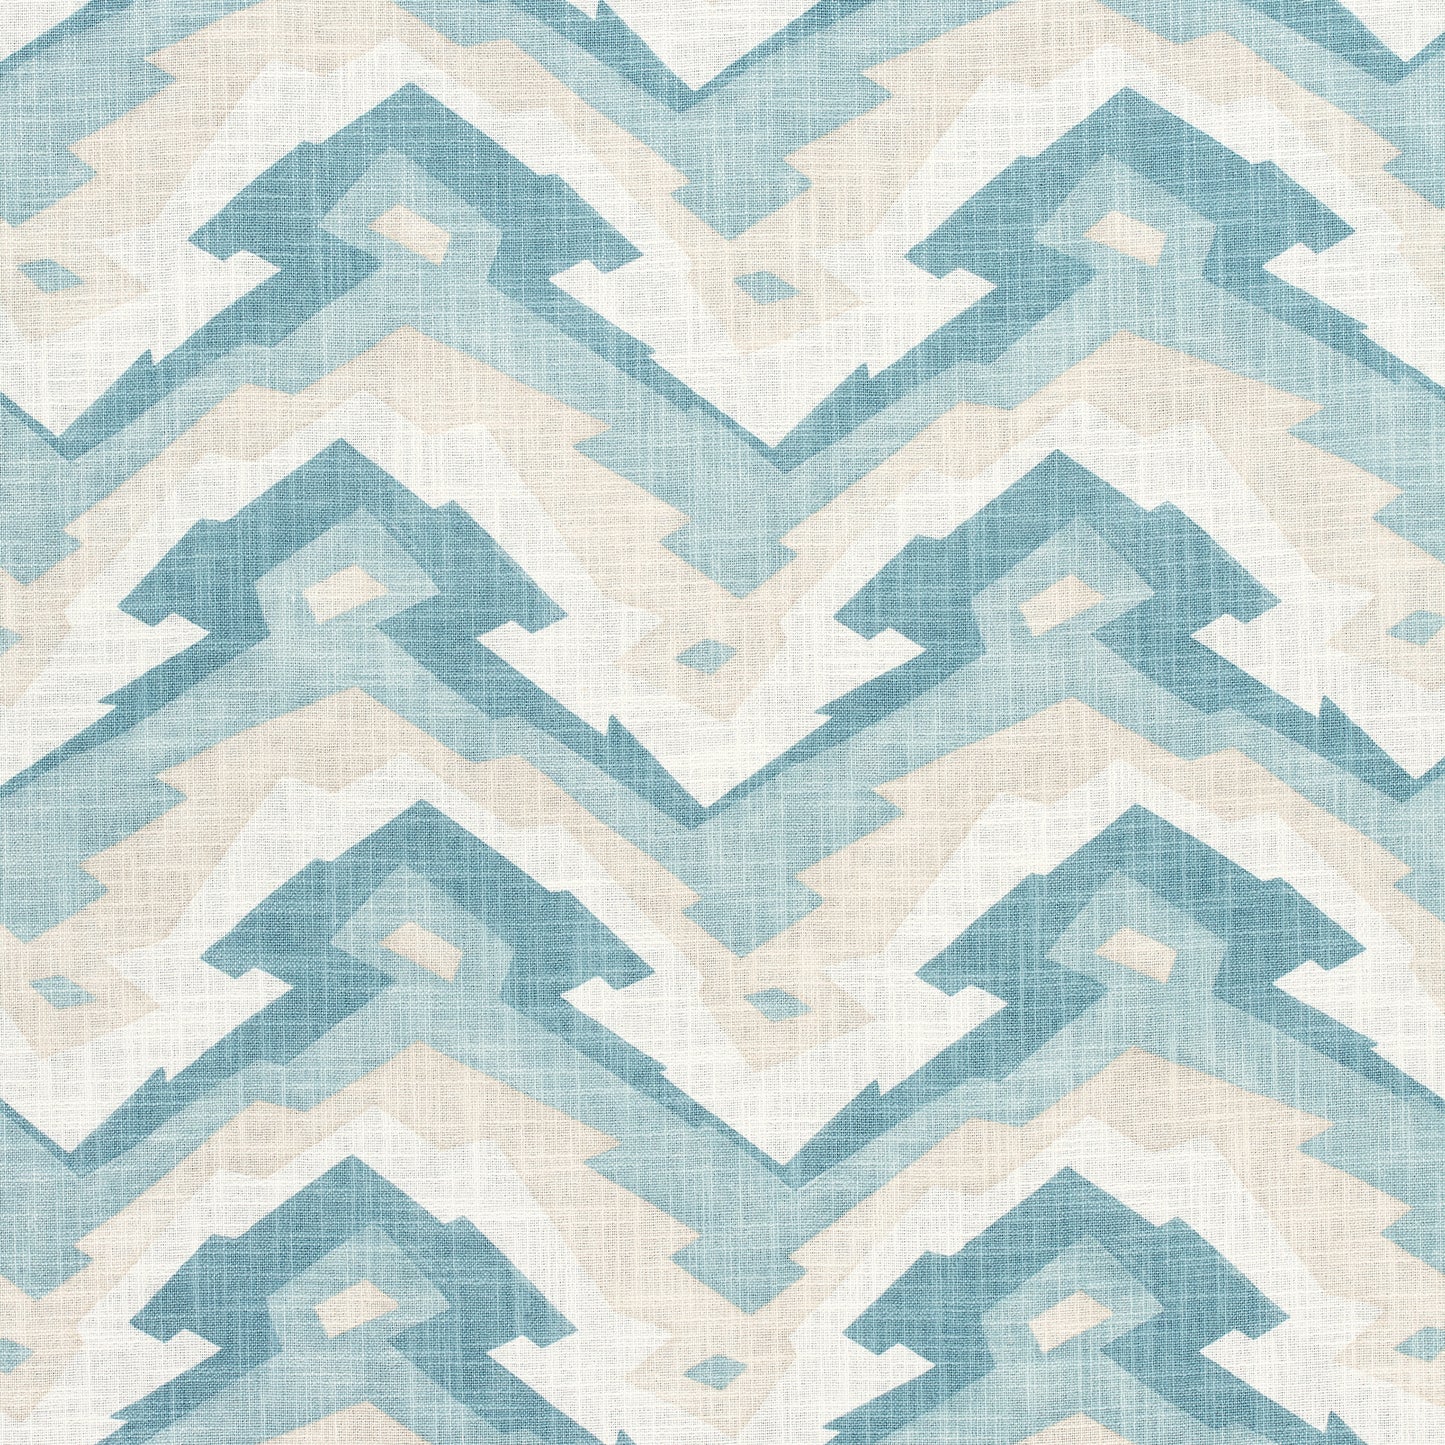 Buy samples of F913107 Deco Mountain Printed Summer House Thibaut Fabrics